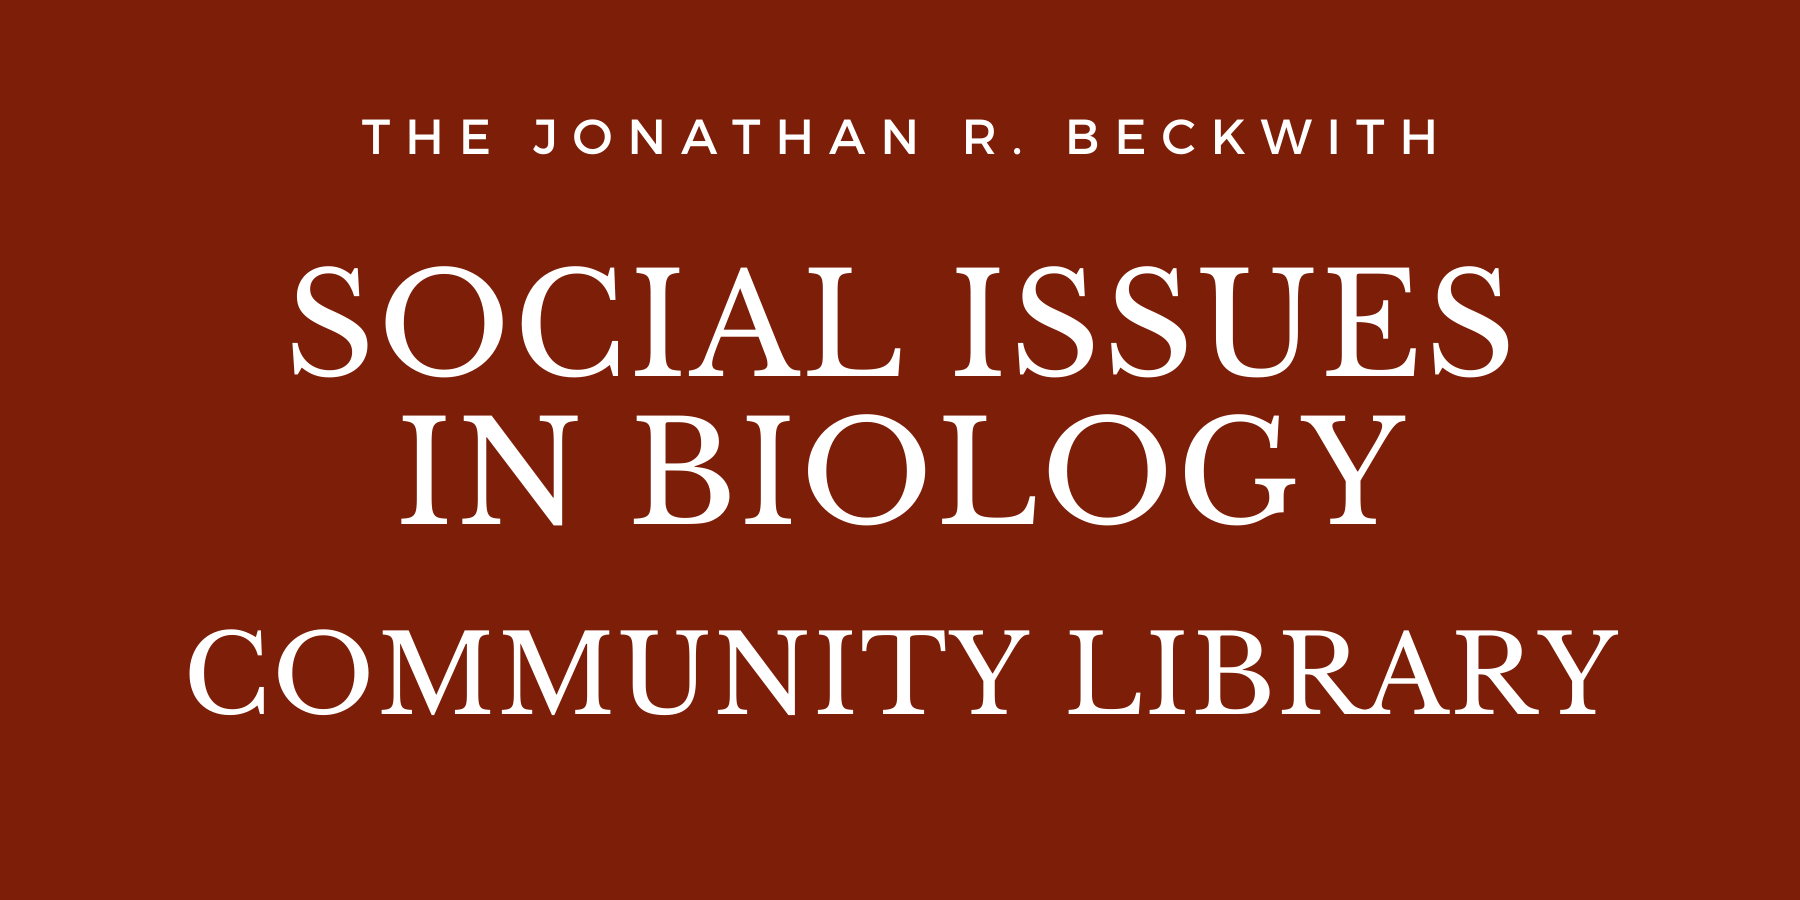 Social Issues in Biology Community Library